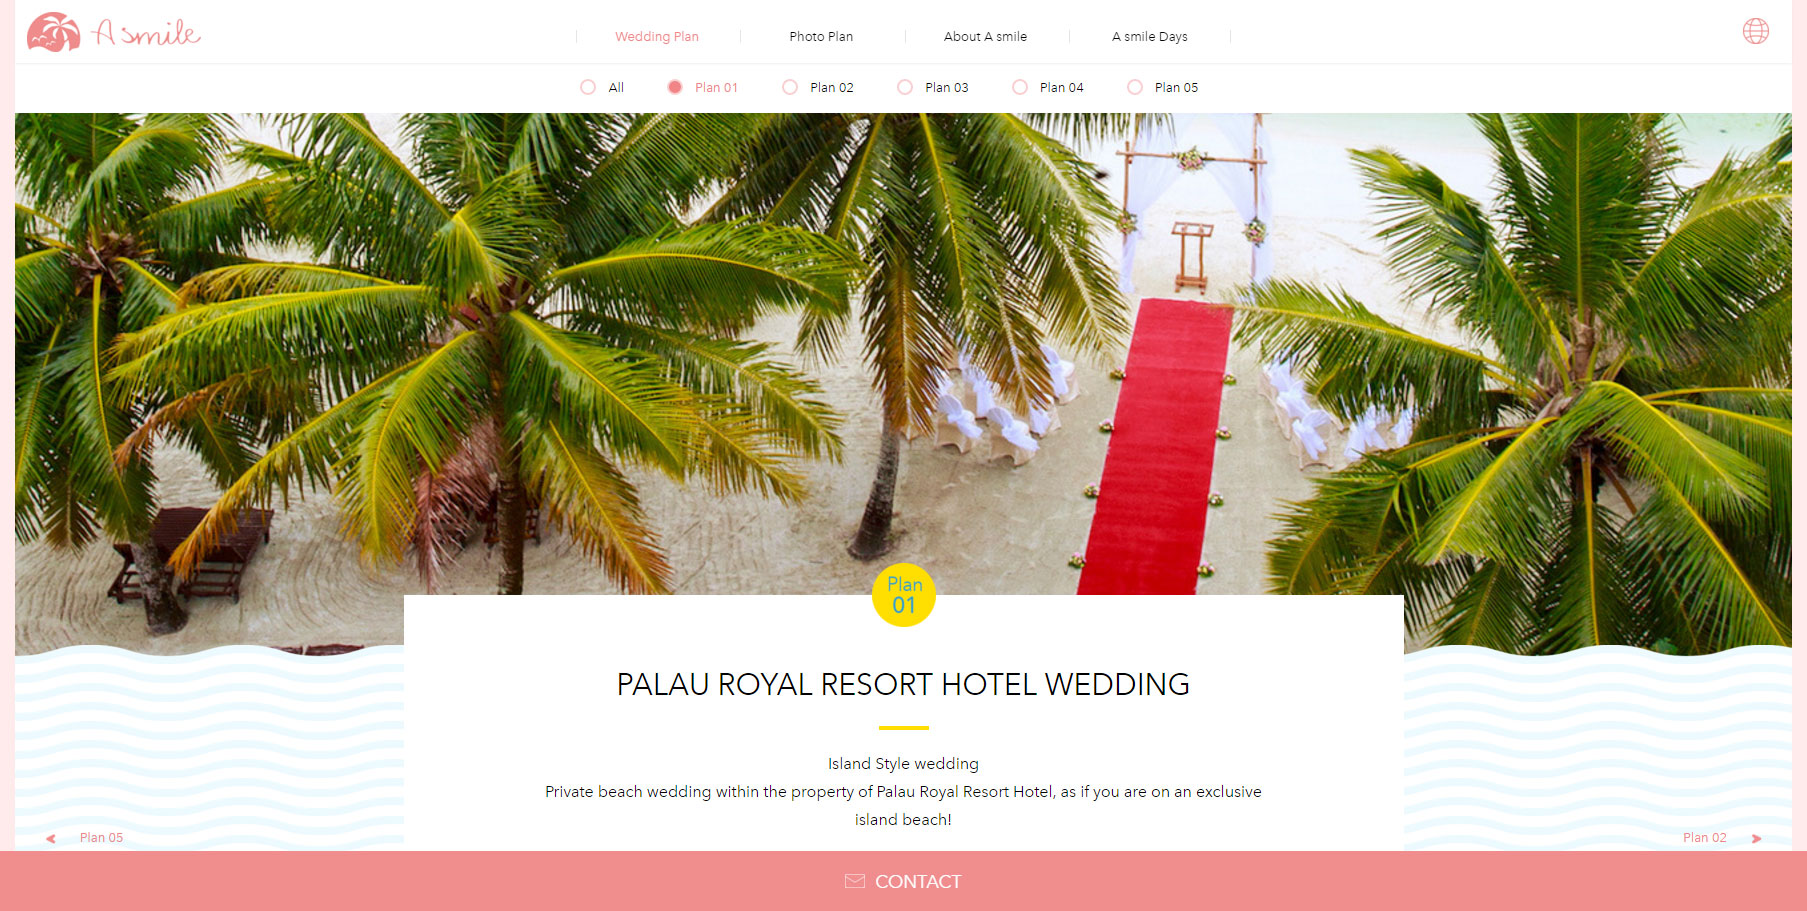 Palau Wedding A smile - Website of the Day